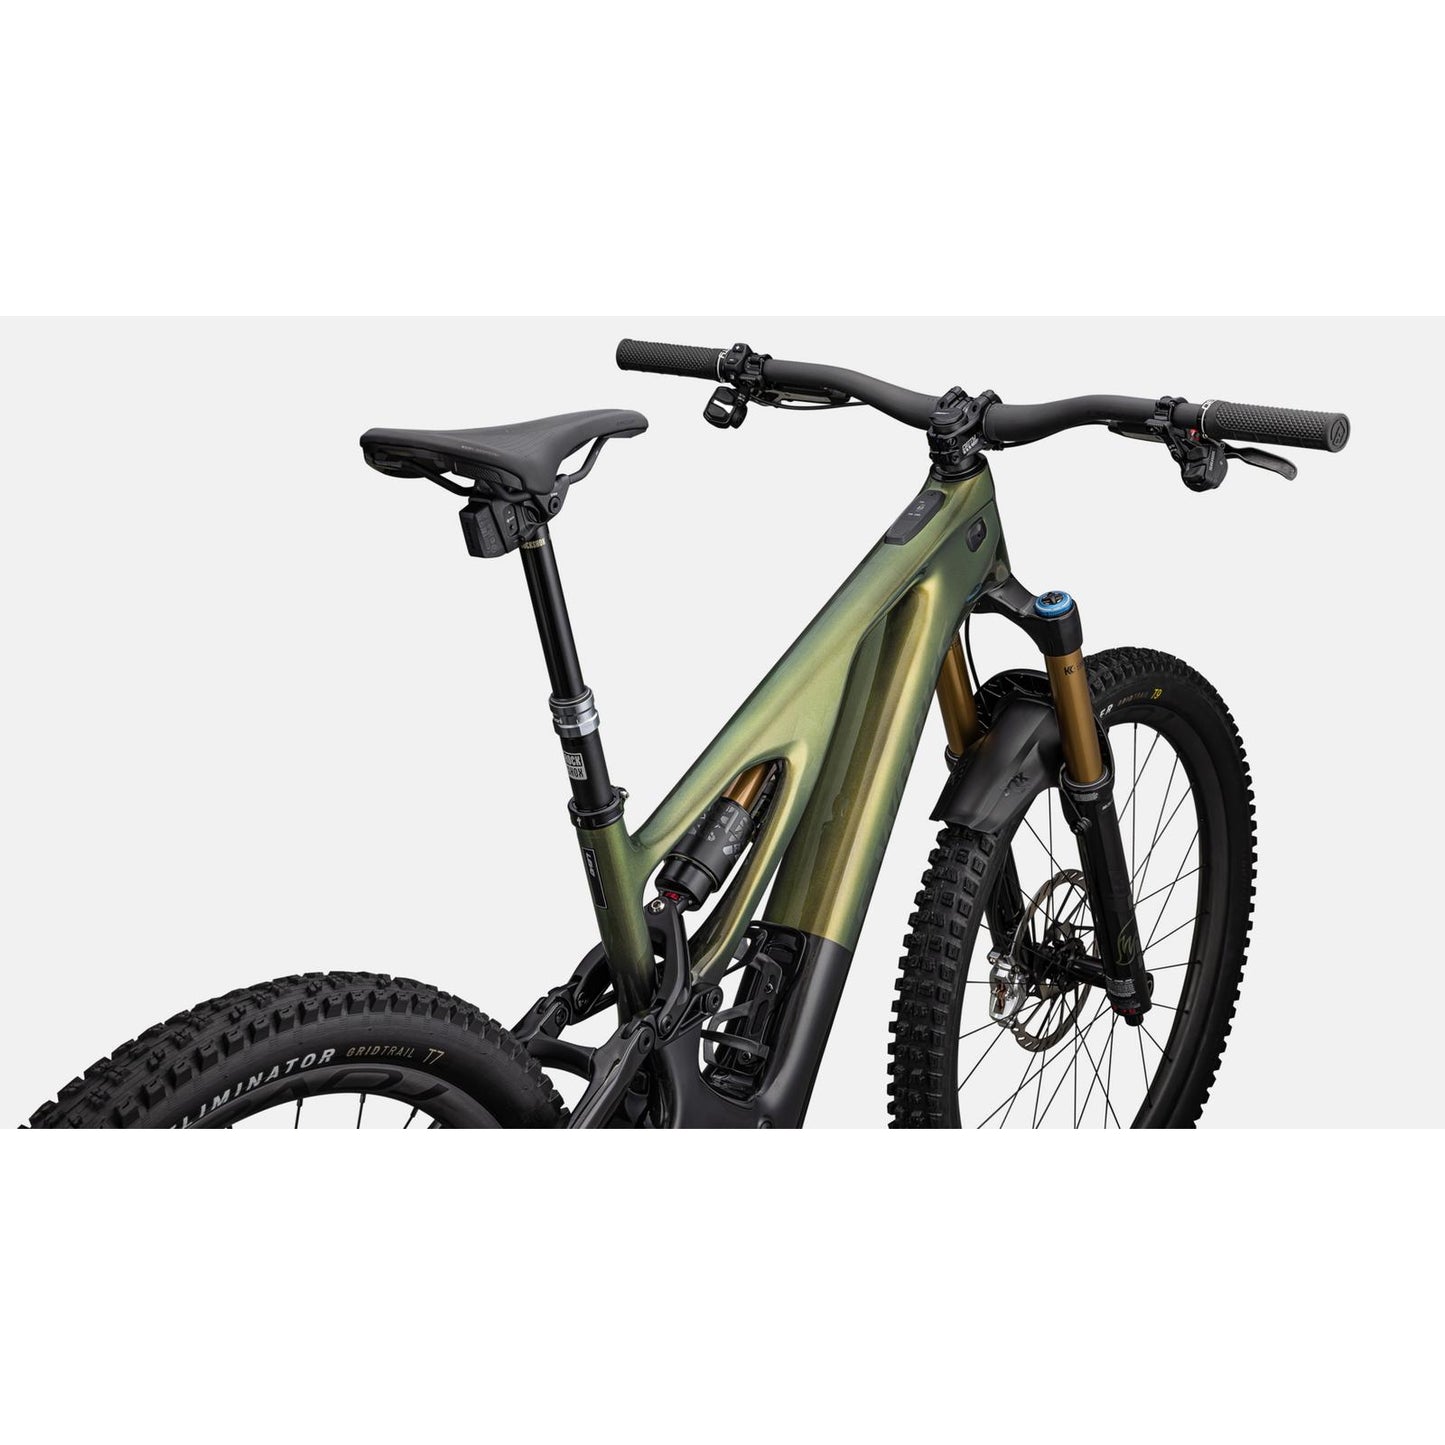 Specialized Levo S-Works Carbon G3 Electric Mountain Bike - Bikes - Bicycle Warehouse